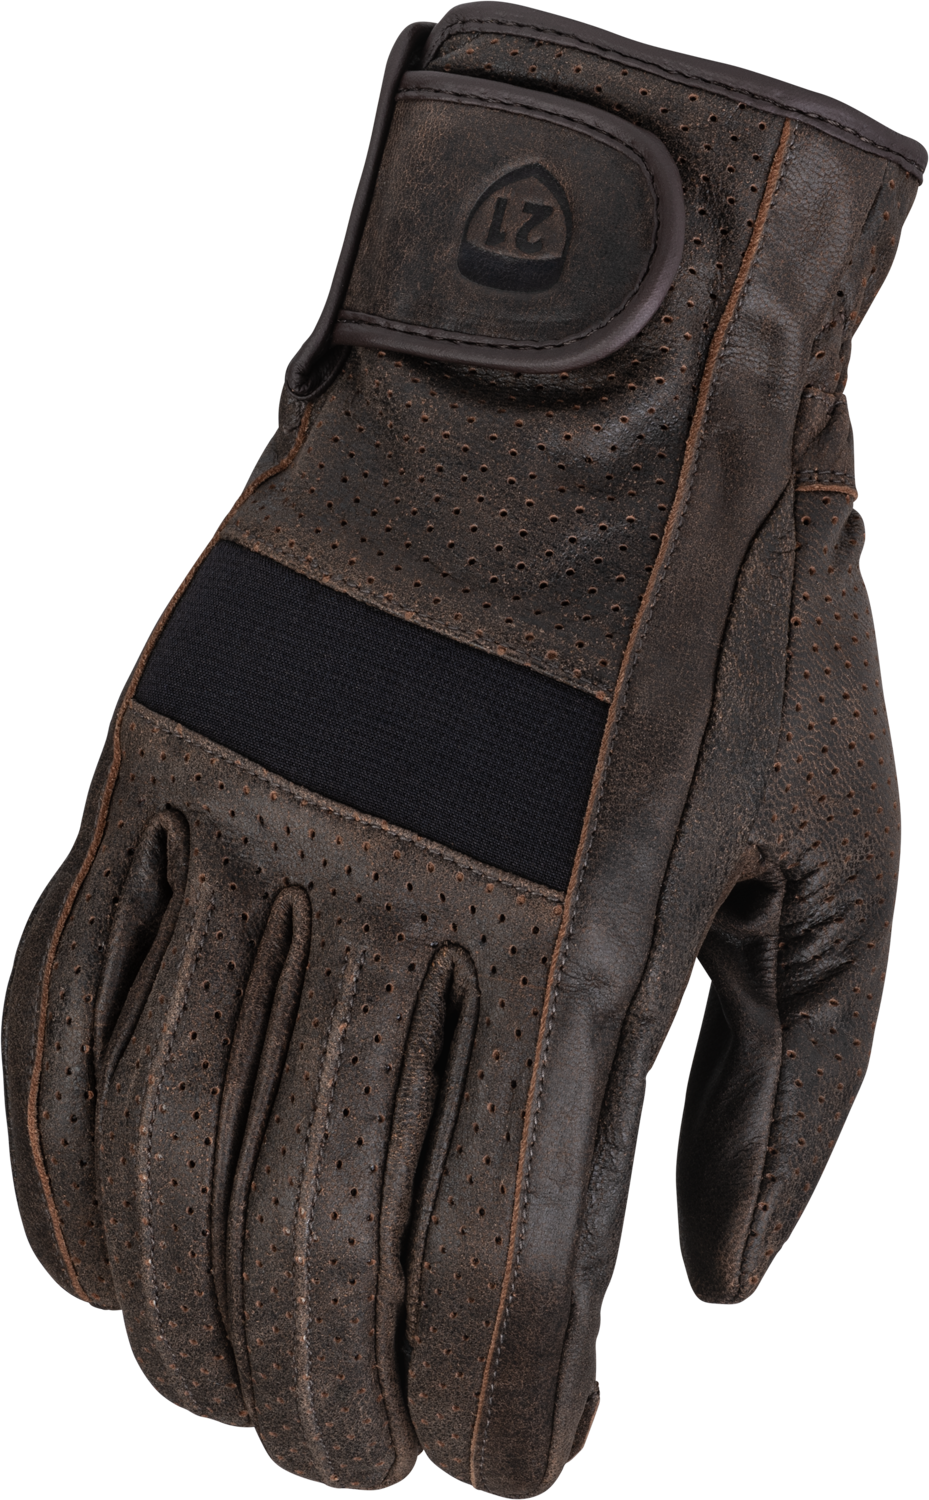 Jab Perforated Gloves Brown 3x